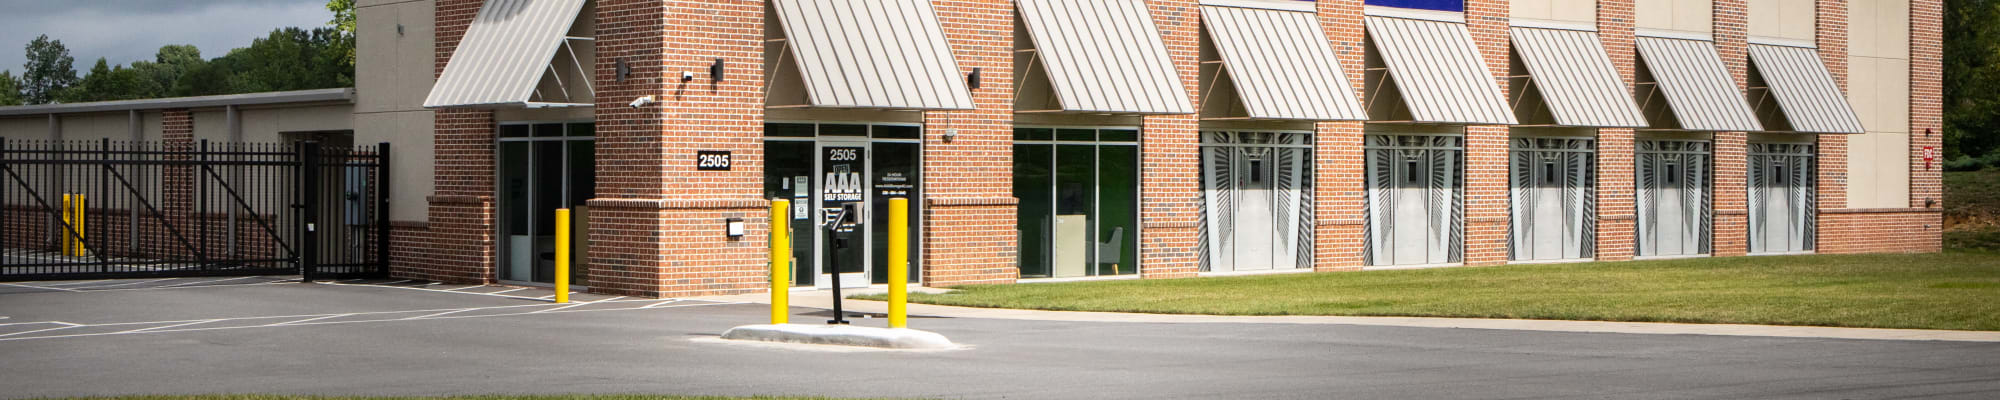 Read or write reviews about AAA Self Storage at Battleground Rd in Greensboro, NC